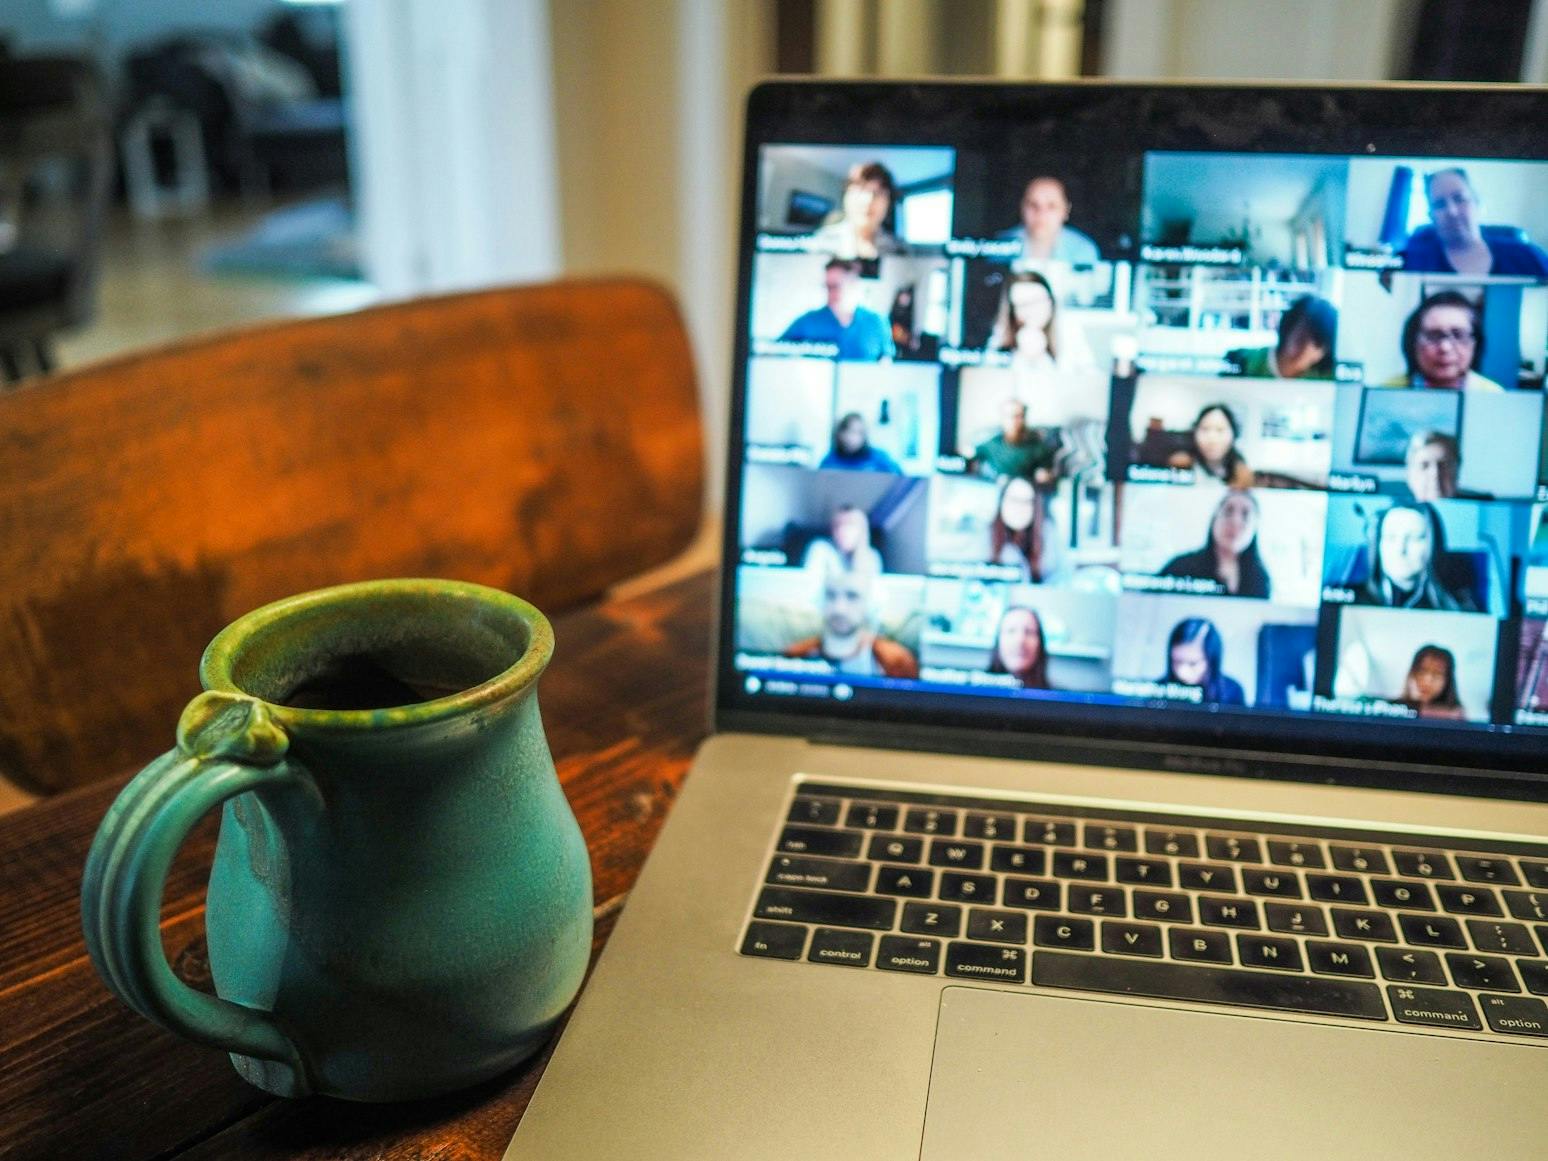 Out of sight, but not out of mind: Keeping remote team members engaged